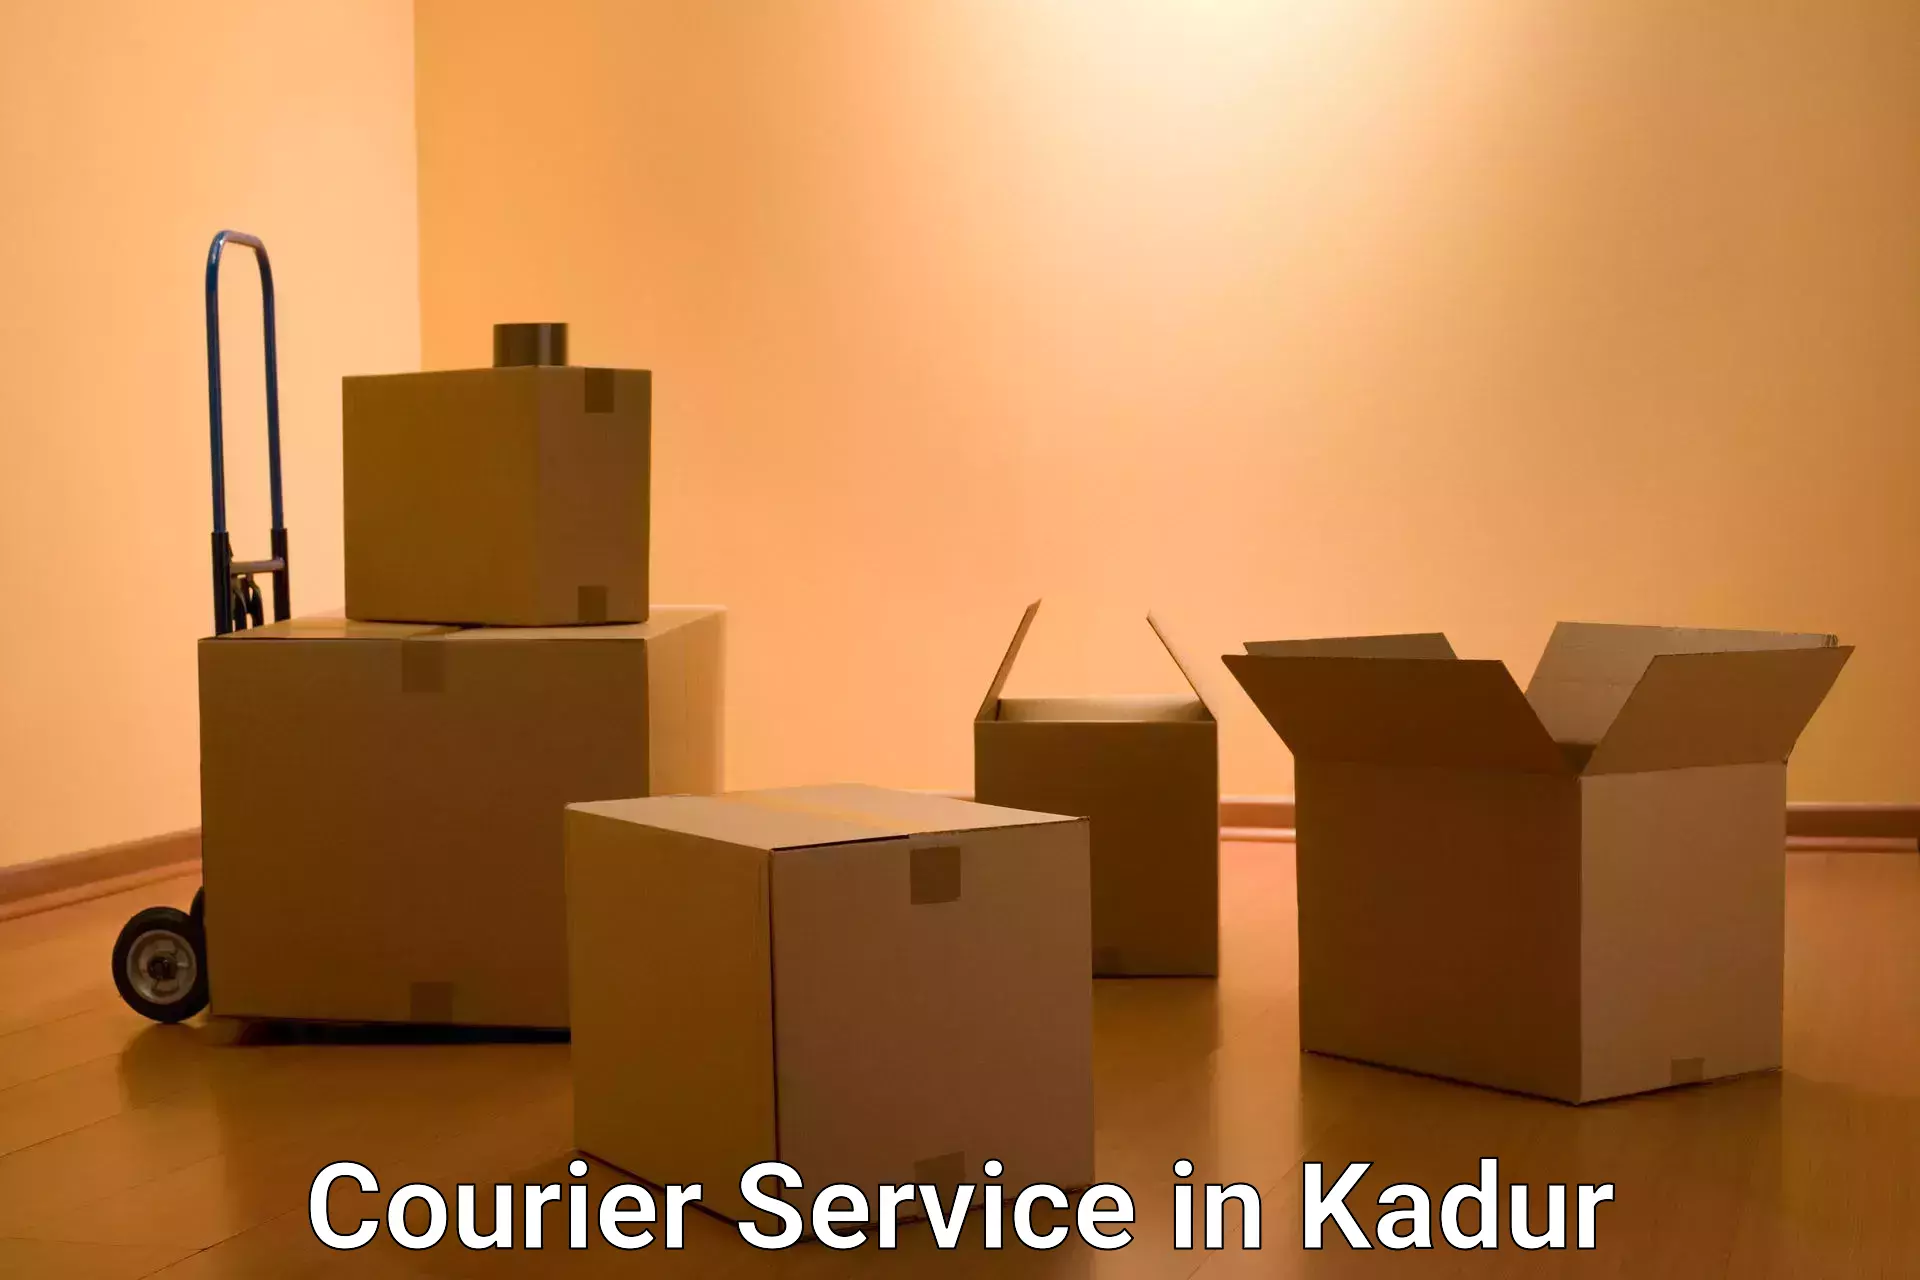 Expedited shipping methods in Kadur